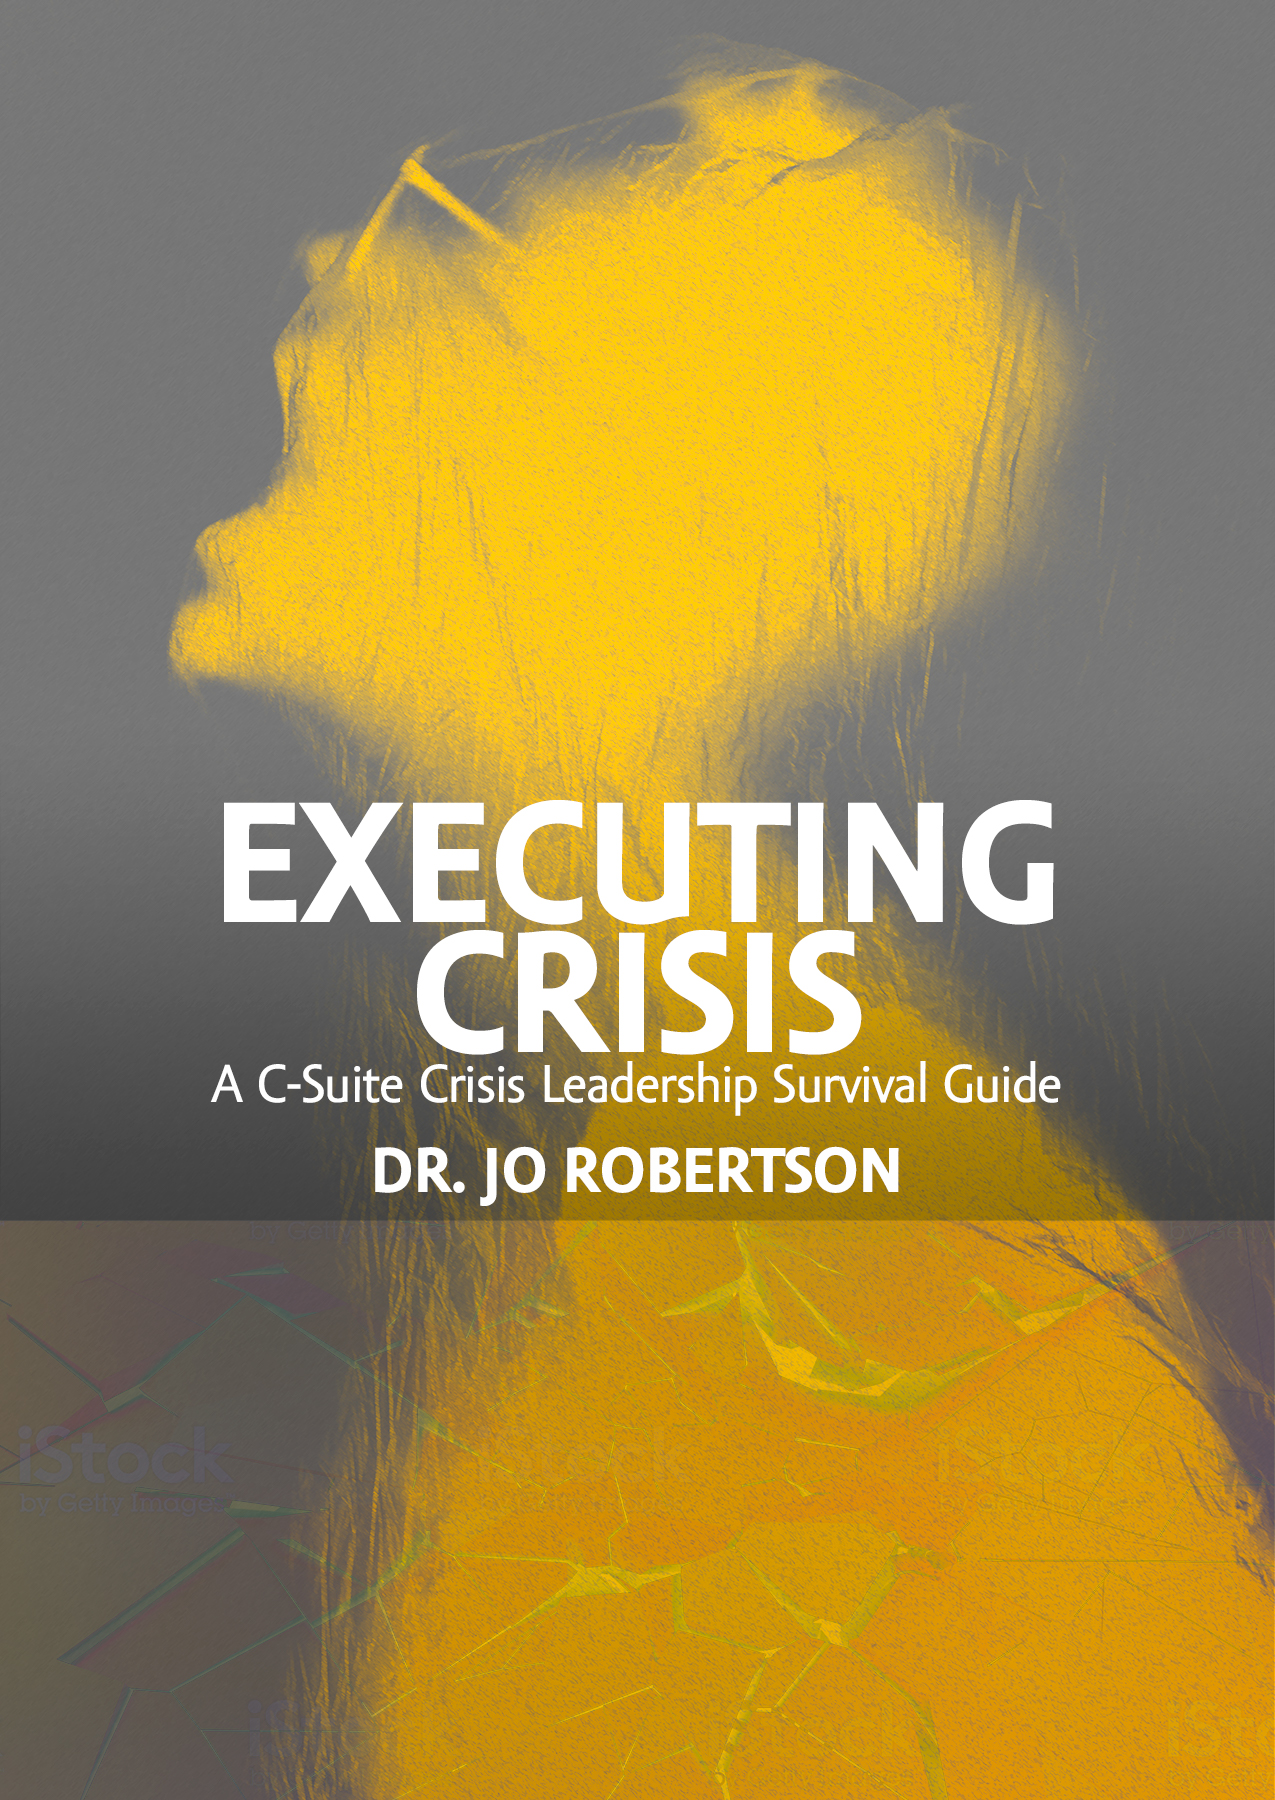 Crisis　Guide　A　Survival　Executing　Publishing　Leadership　Crisis:　C-Suite　Rothstein